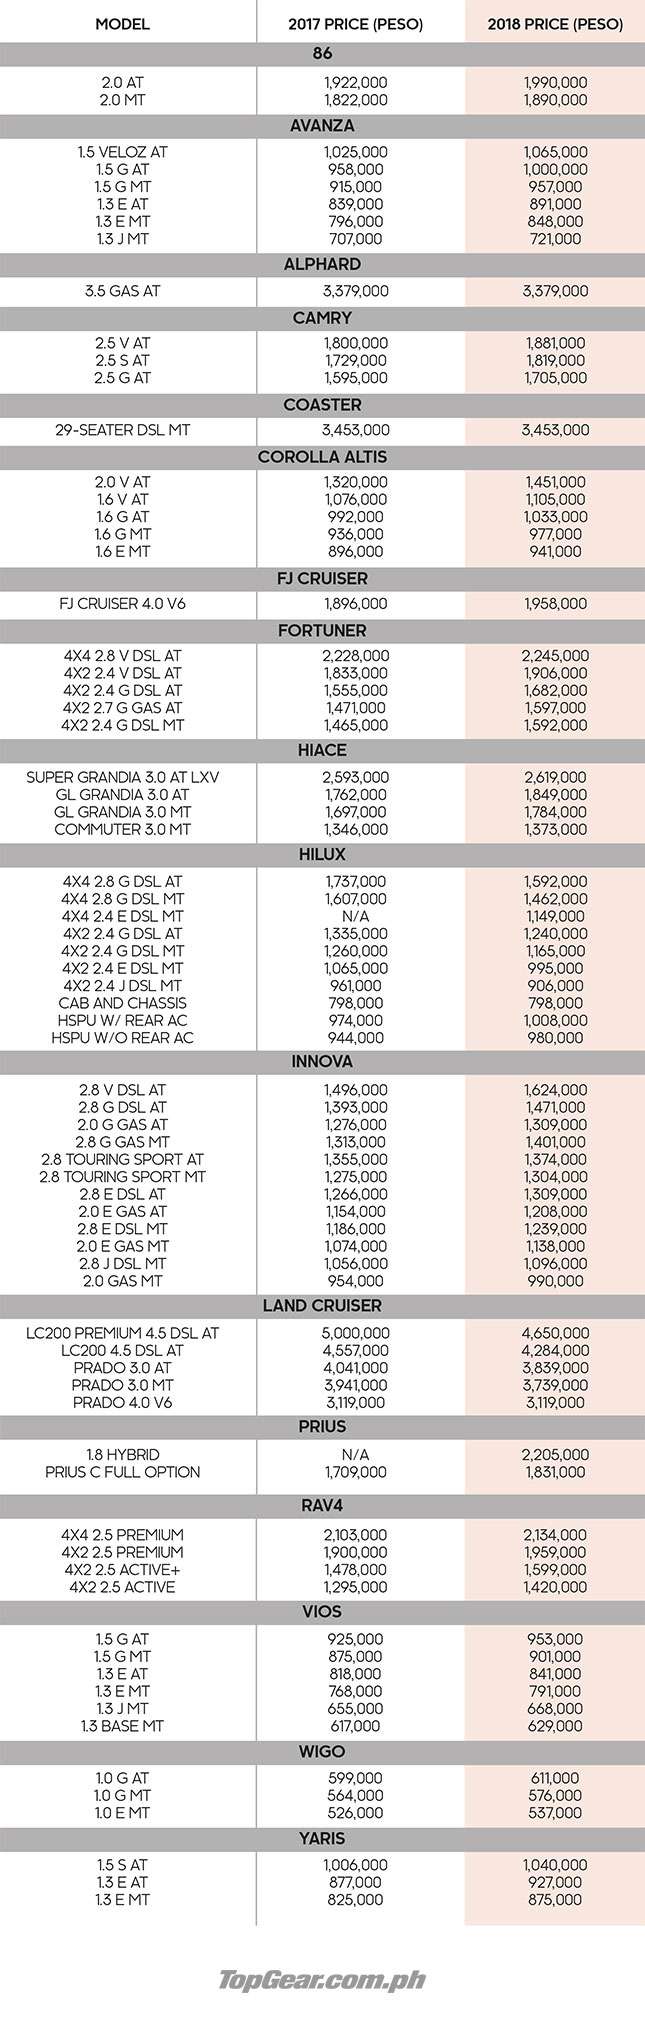 Toyota Ph S Prices For 2018